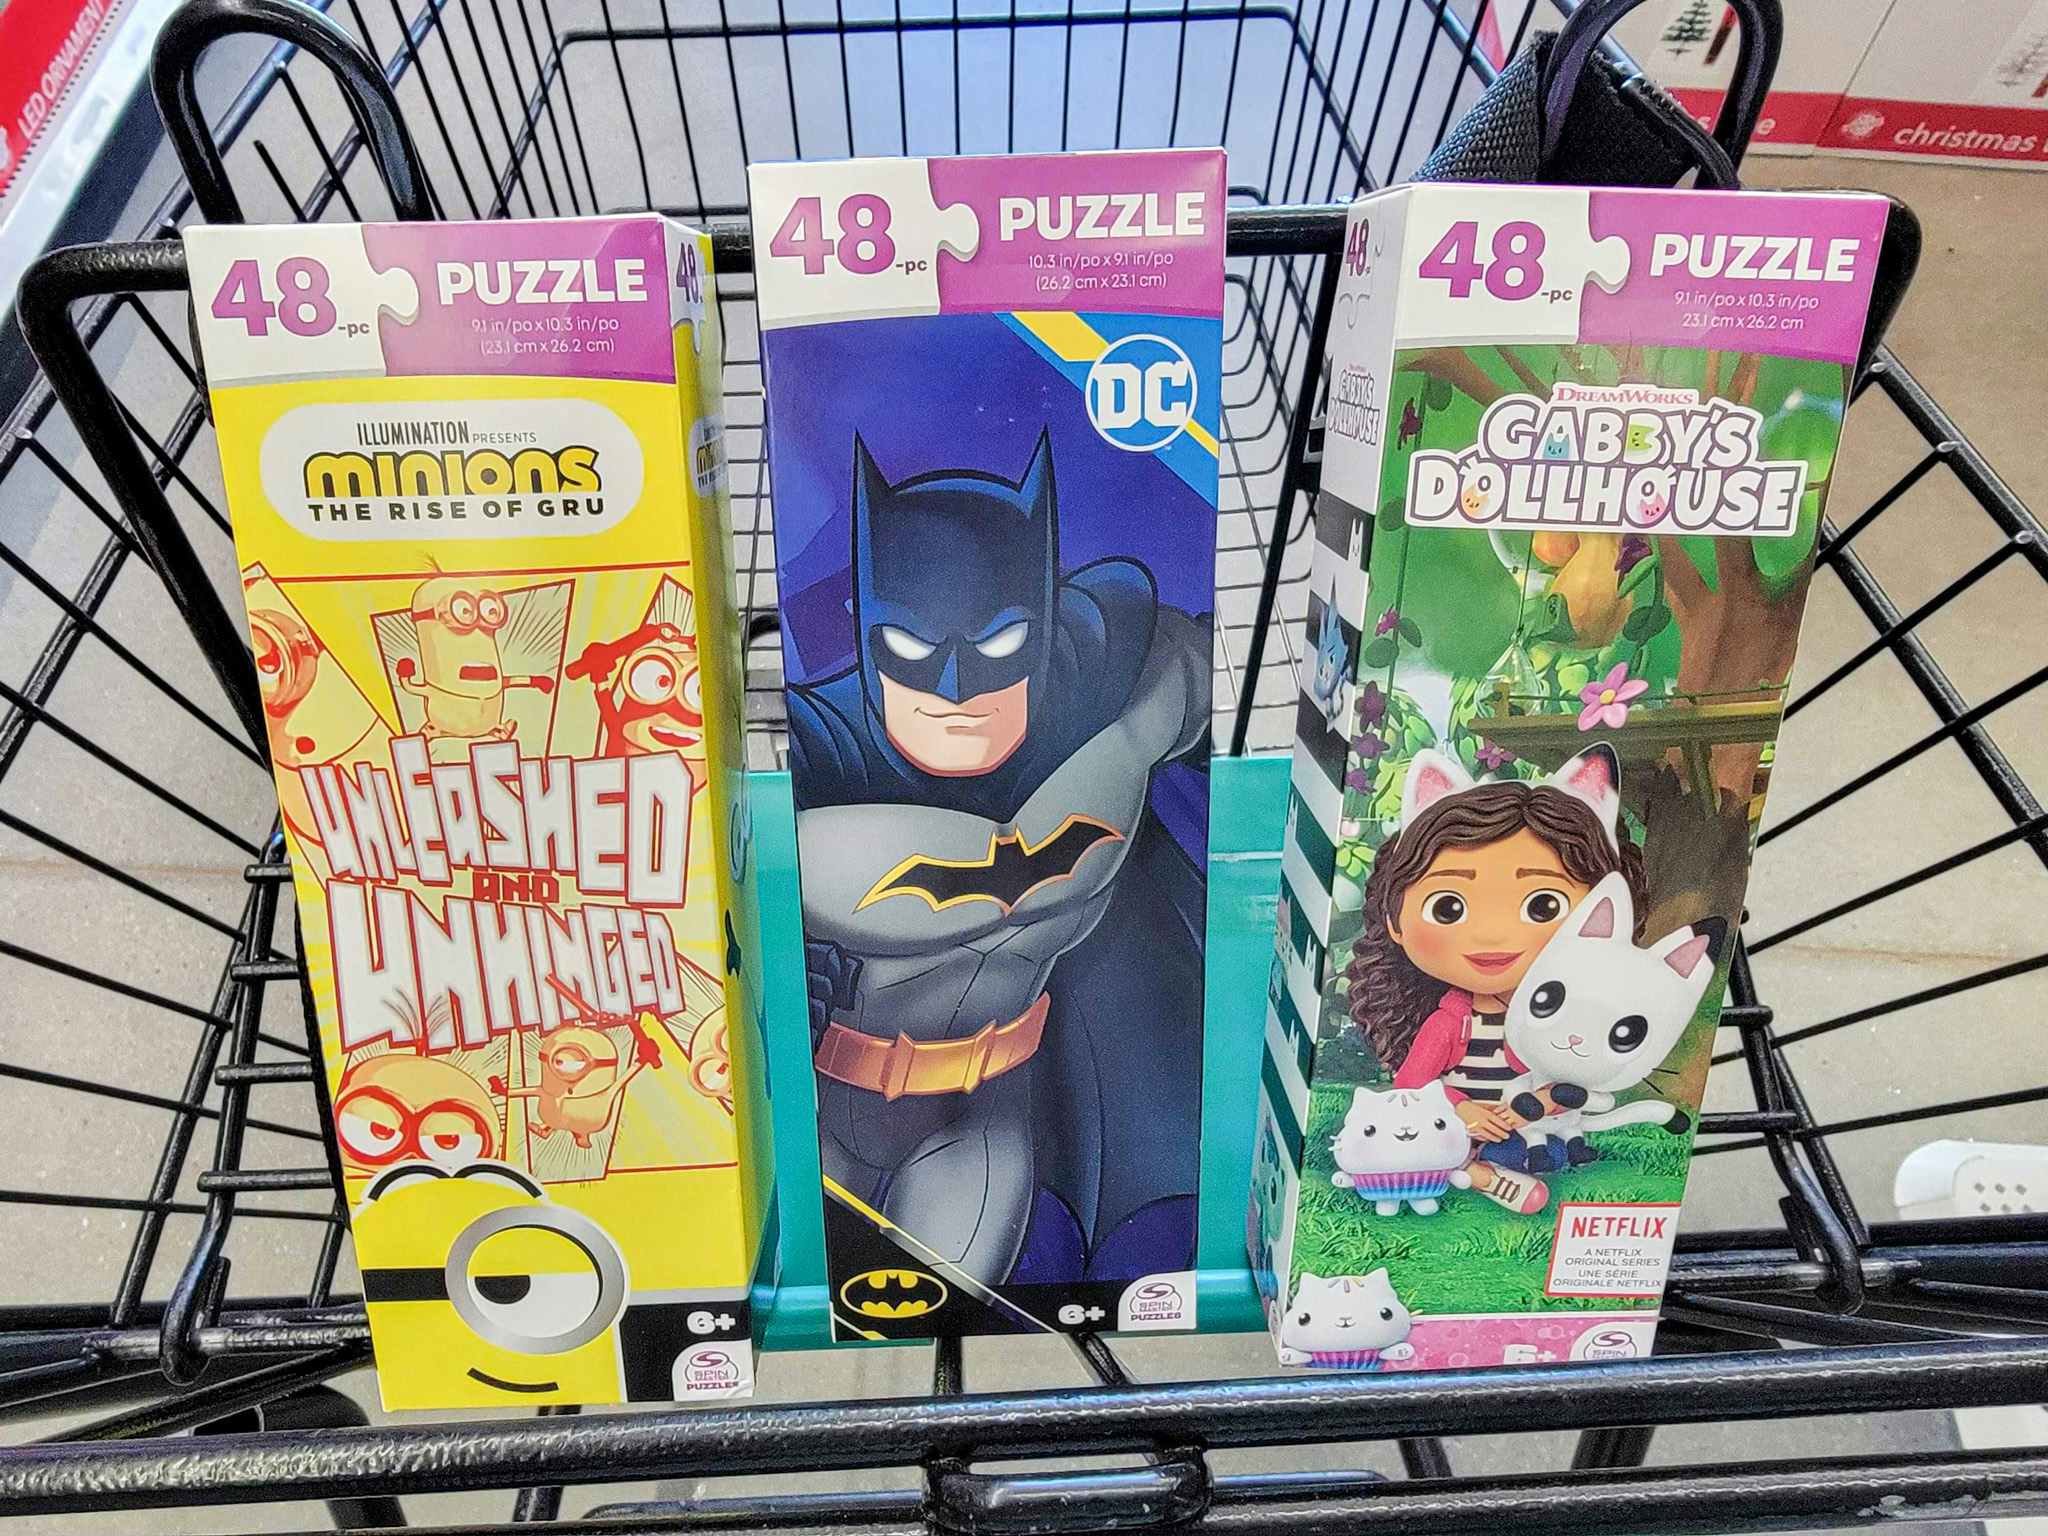 licensed character puzzles in a cart